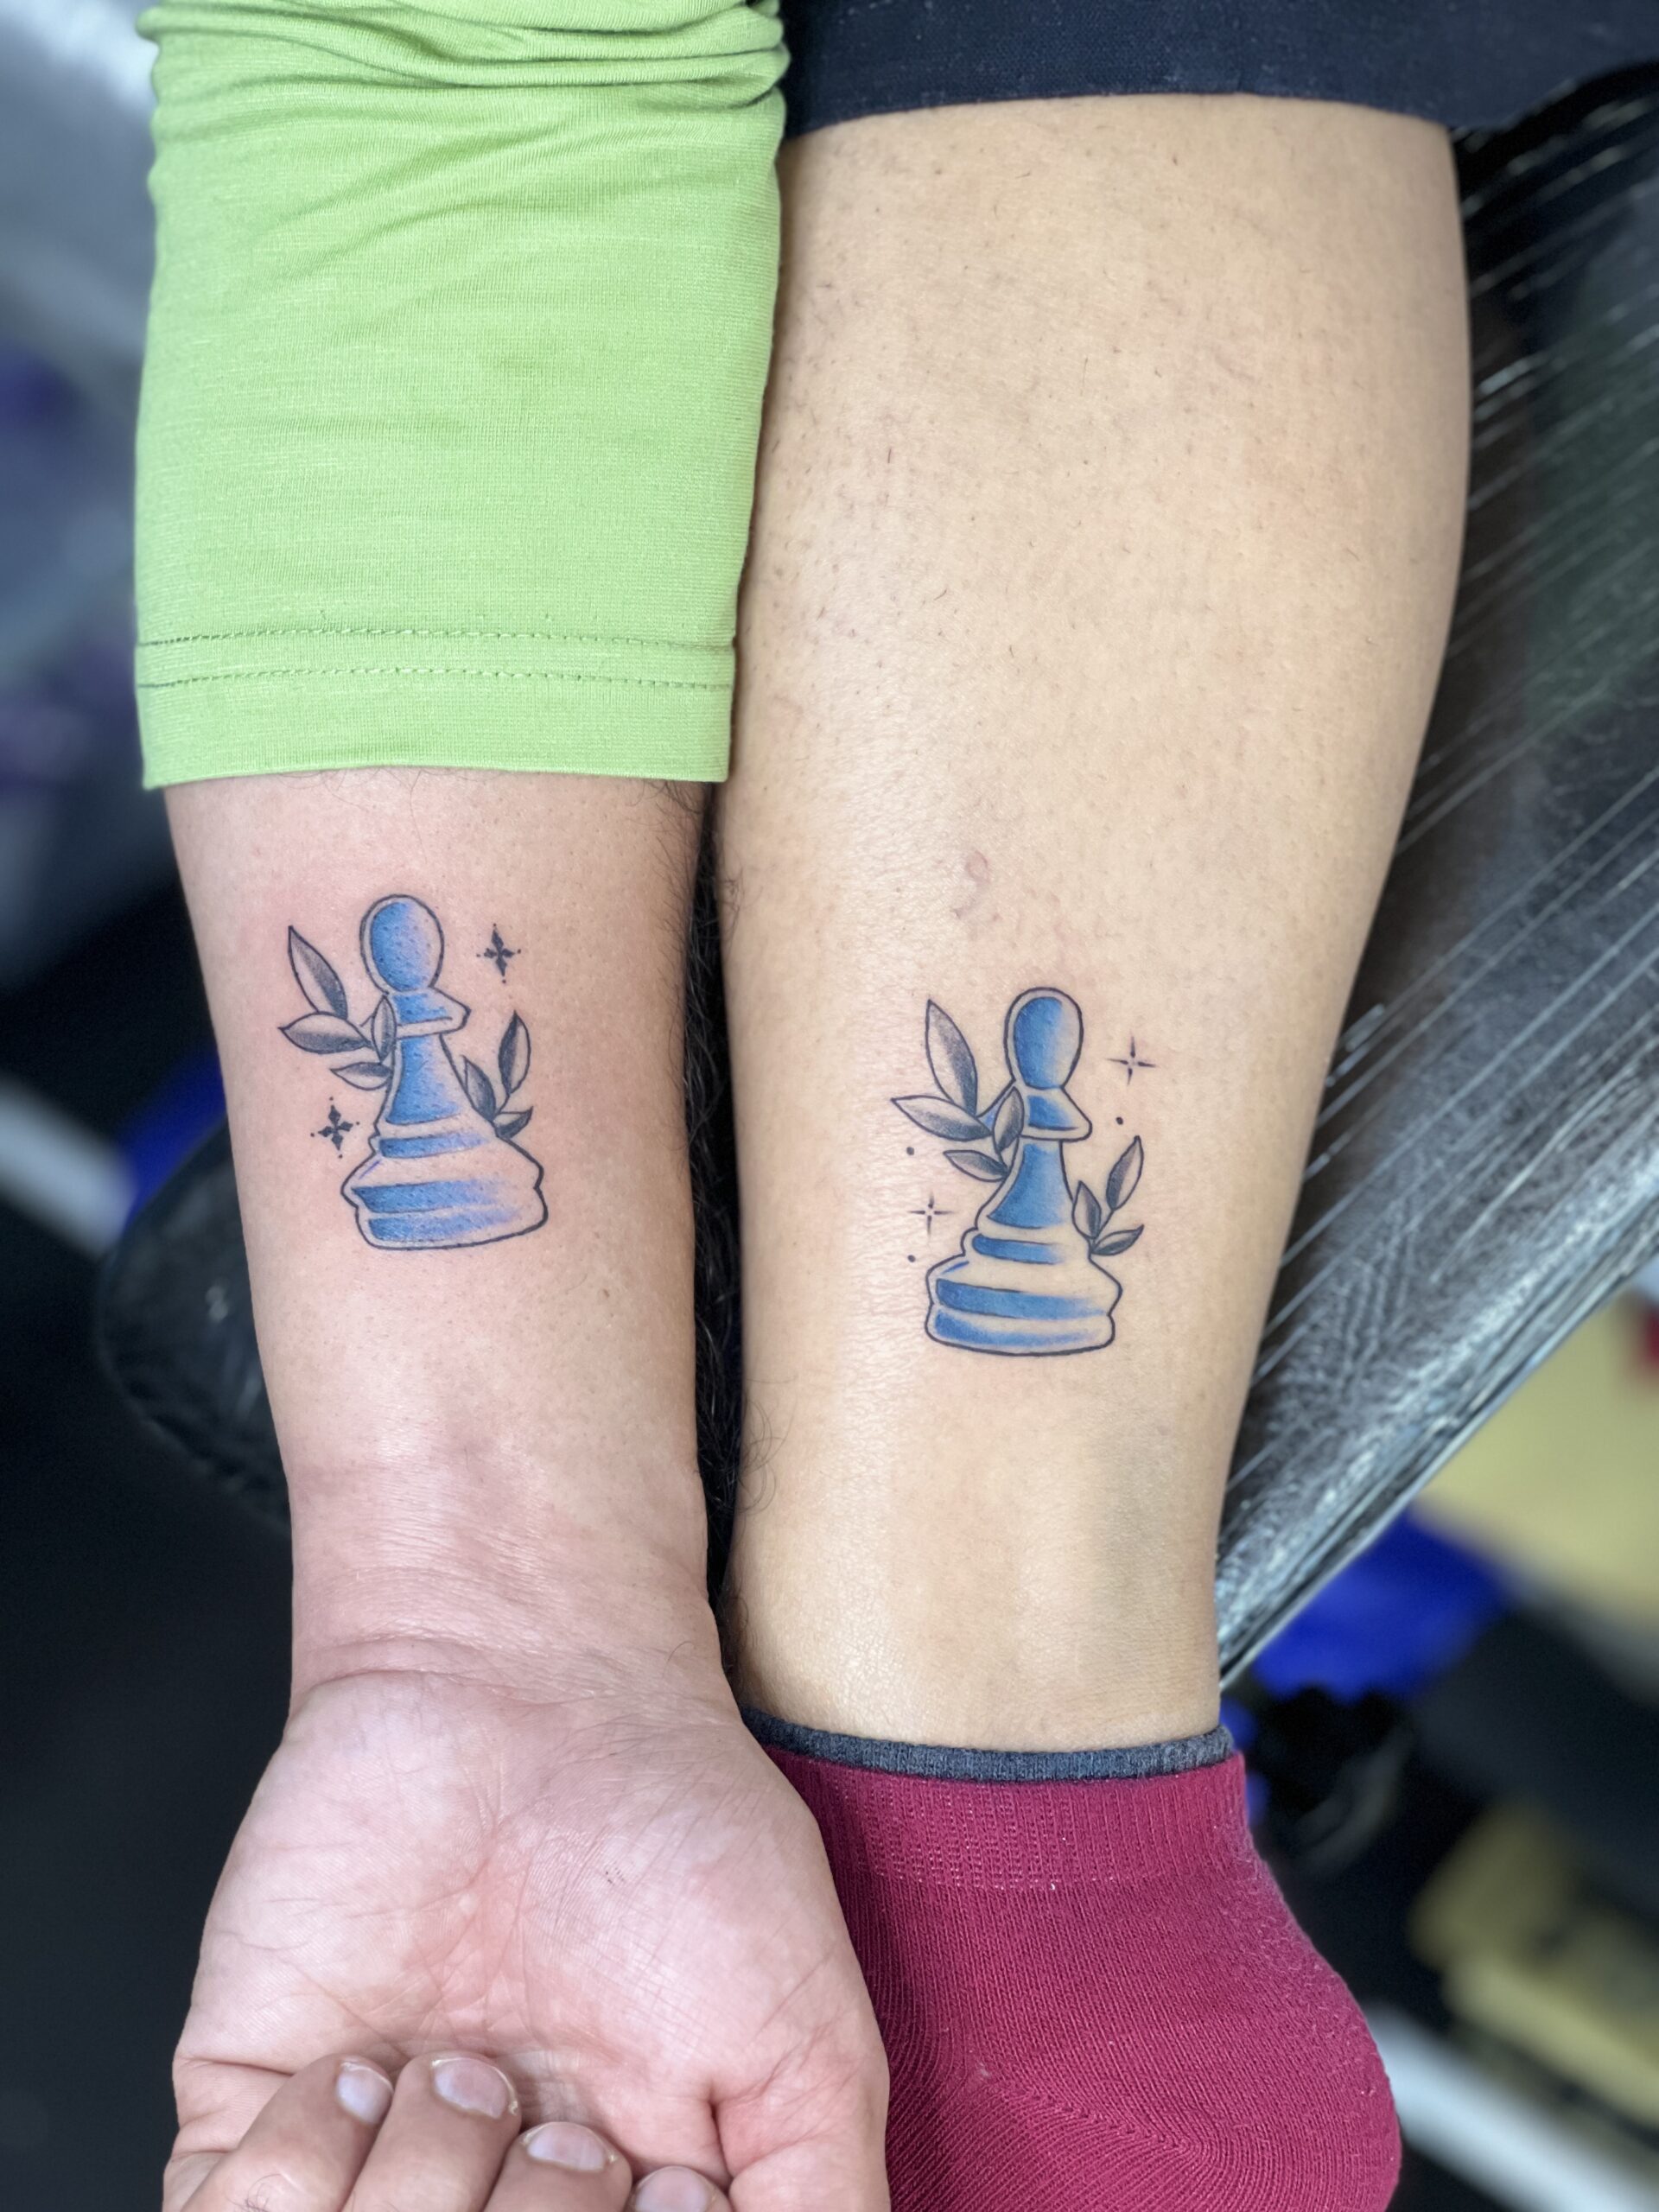 Check out these bad couples tattoos ideas | Roll and Feel